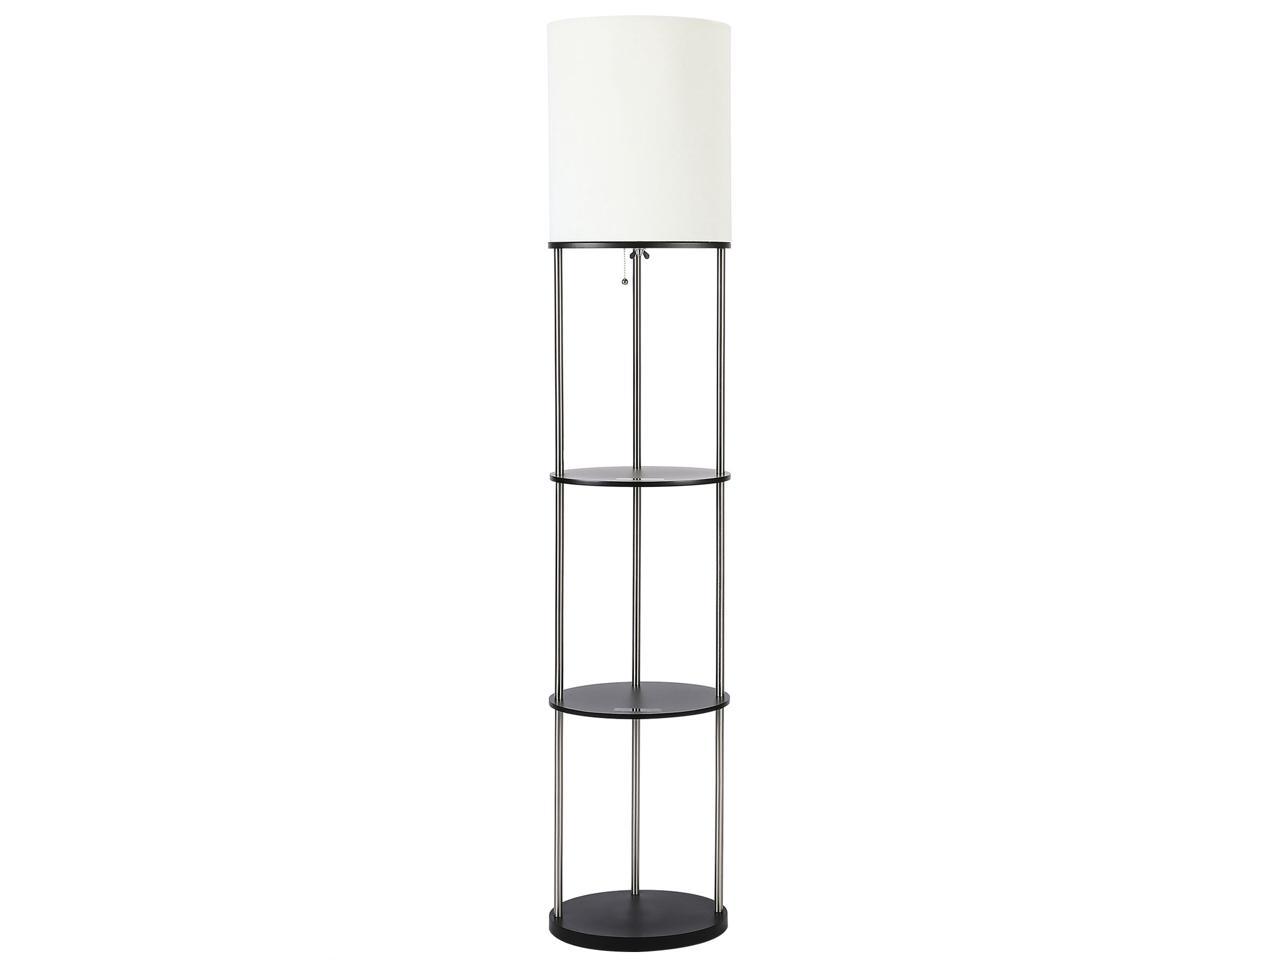 CO-Z White CO-Z Etagere Floor Lamps Standing Column Lamps with 100W Light and 3 Wood Display Storage Shelves 2 PCS White